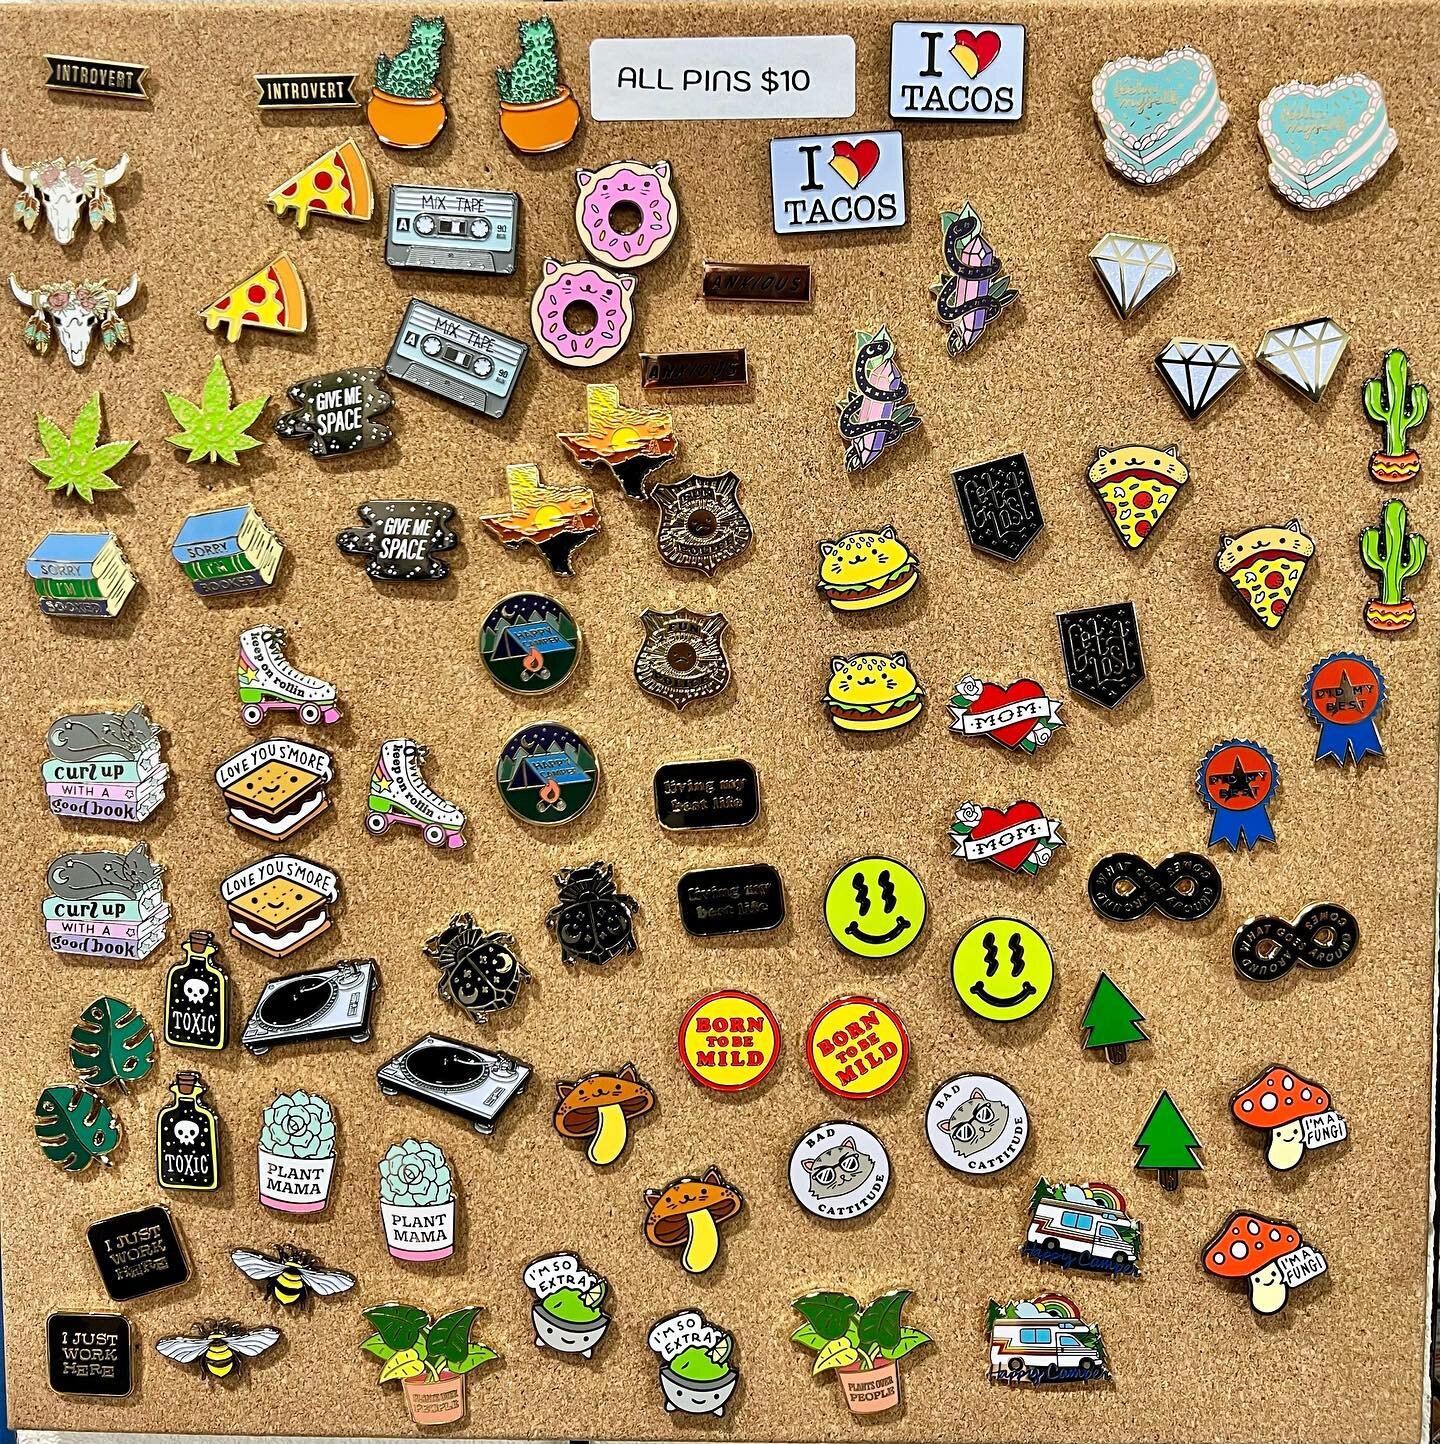 We have more than just alien stuff! Come in and check out our pins - we are always putting cool new ones on our pin board 😎